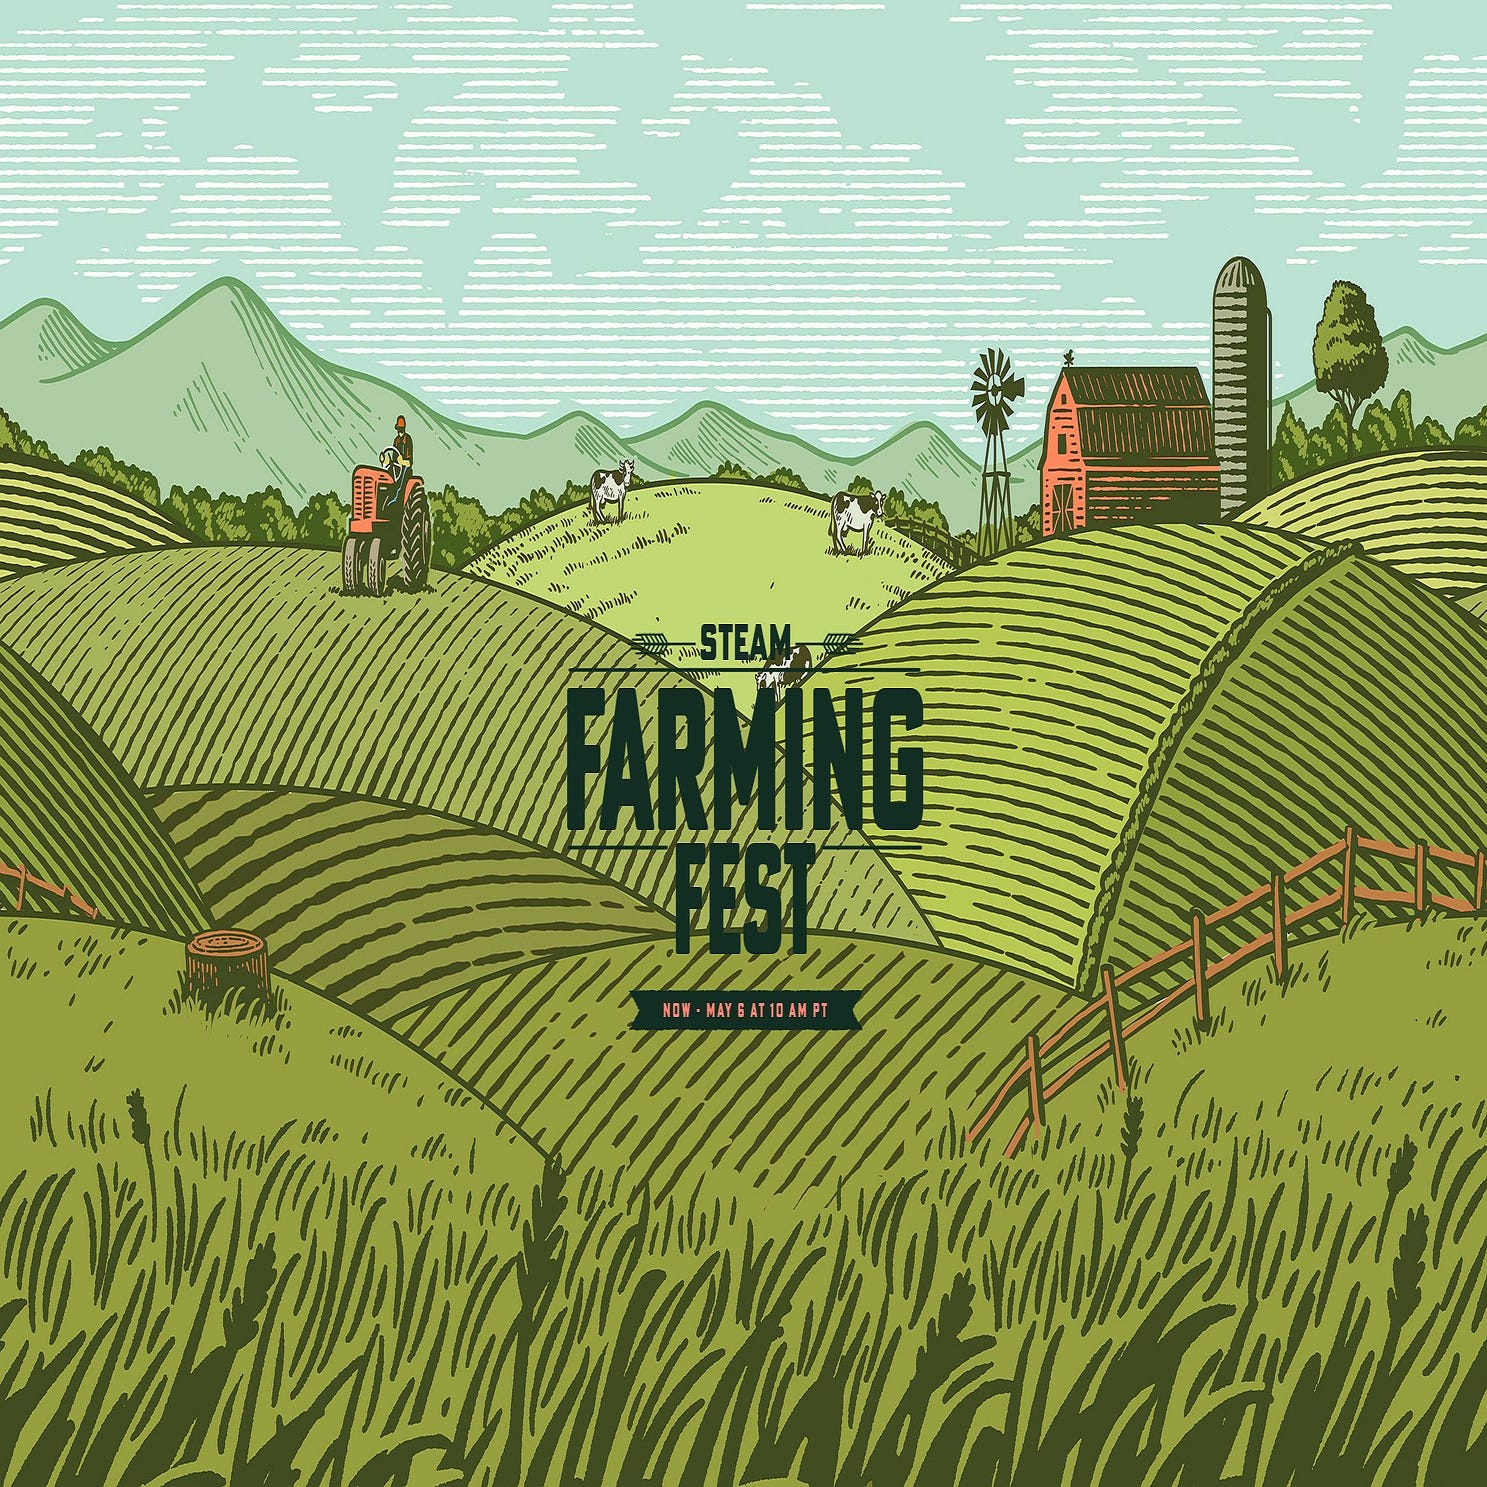 Sow the seeds of fun with Steam's Farming Fest - we've picked the perfect games for every kind of virtual farmer